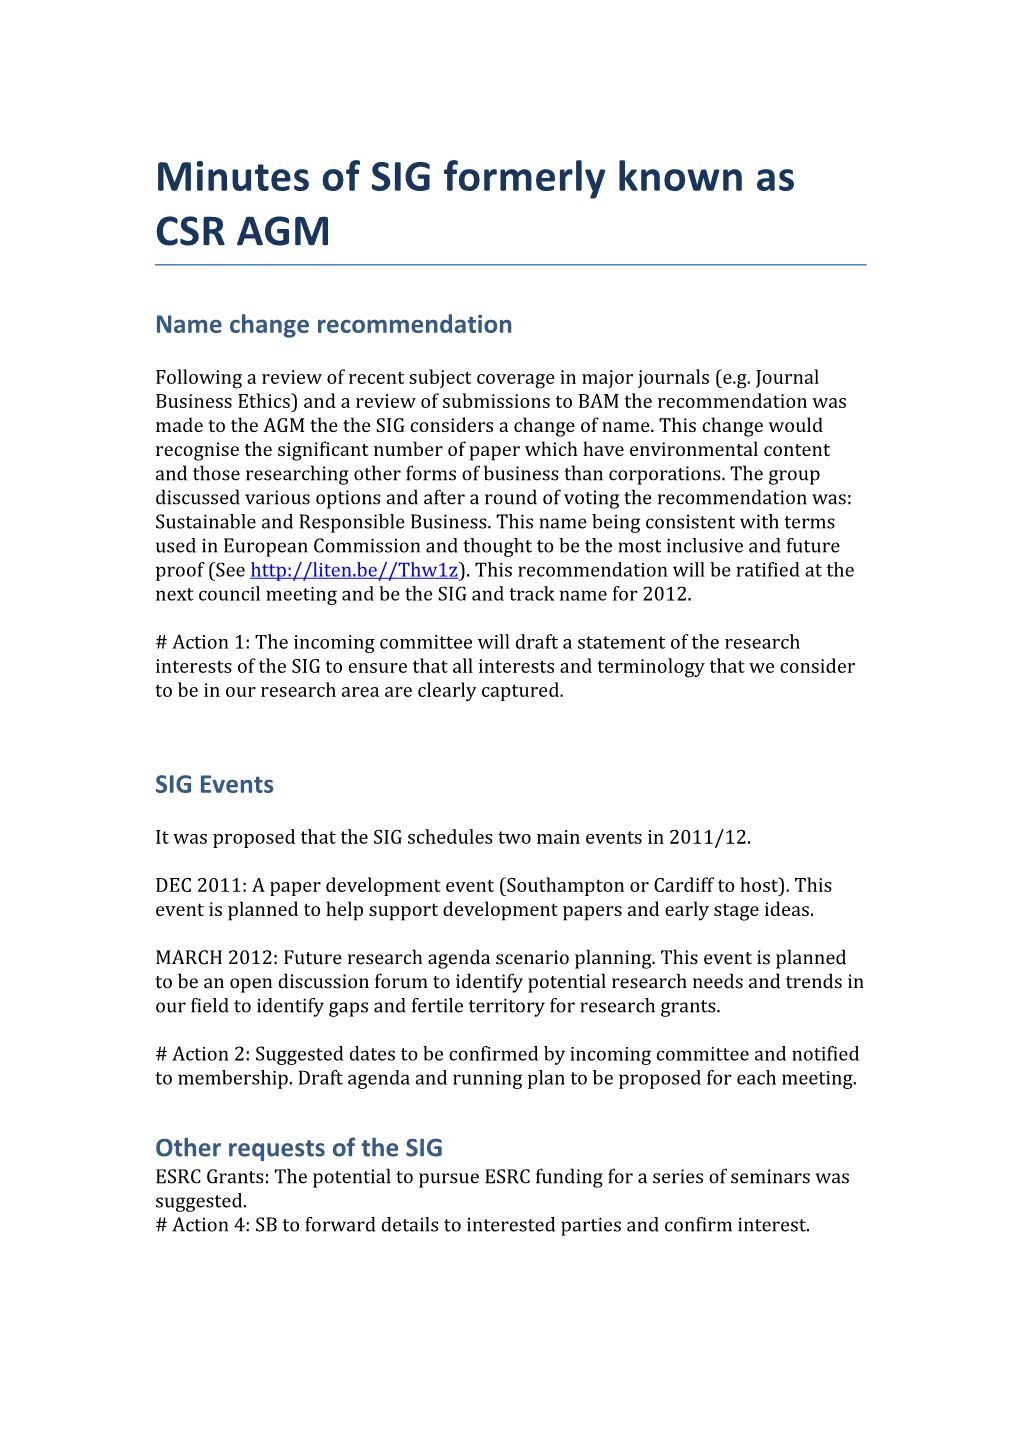 Minutes of SIG Formerly Known As CSR AGM